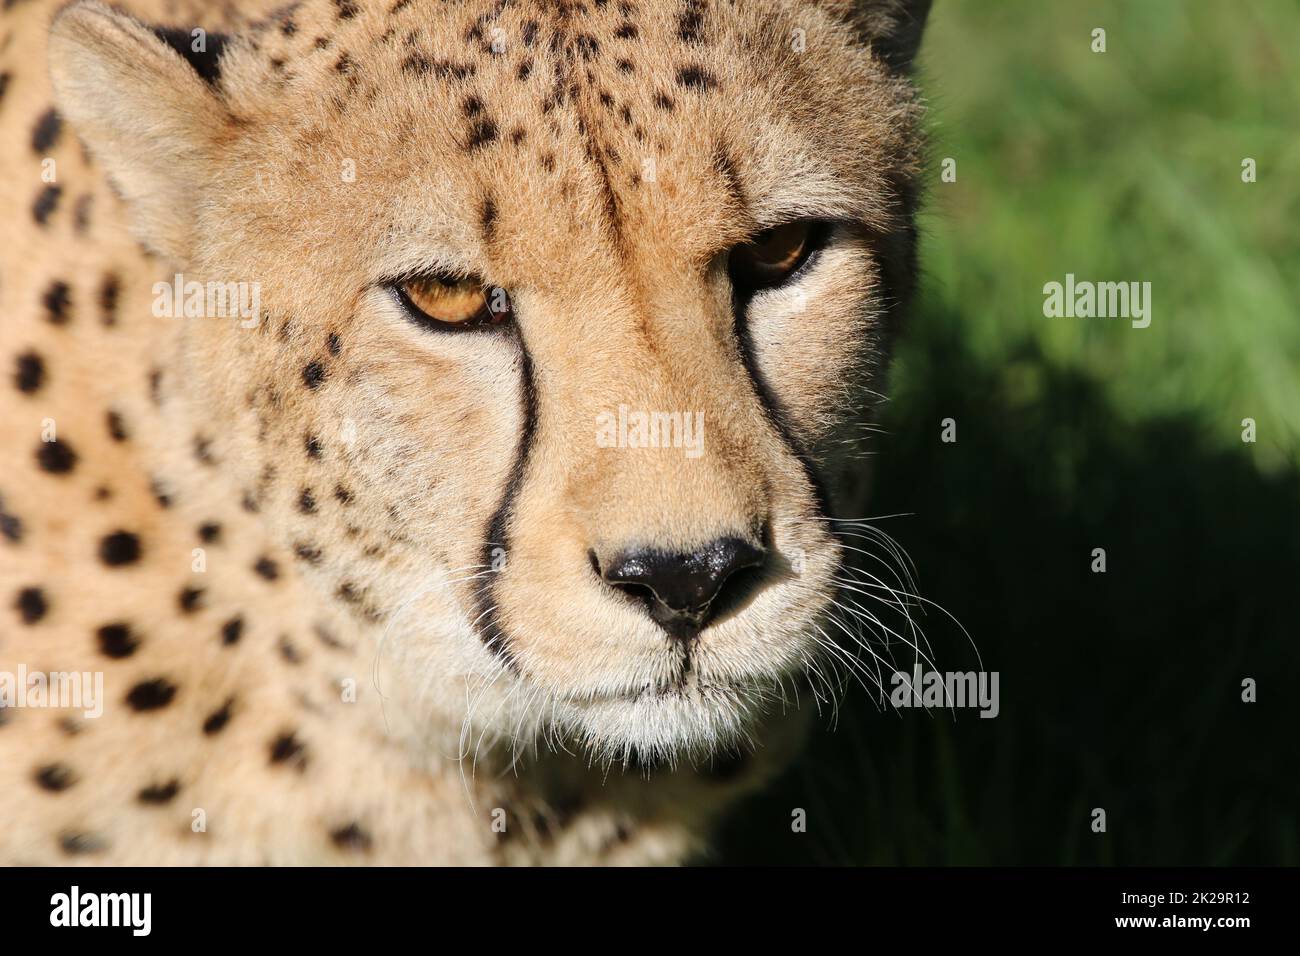 Cheetah in South Africa Stock Photo